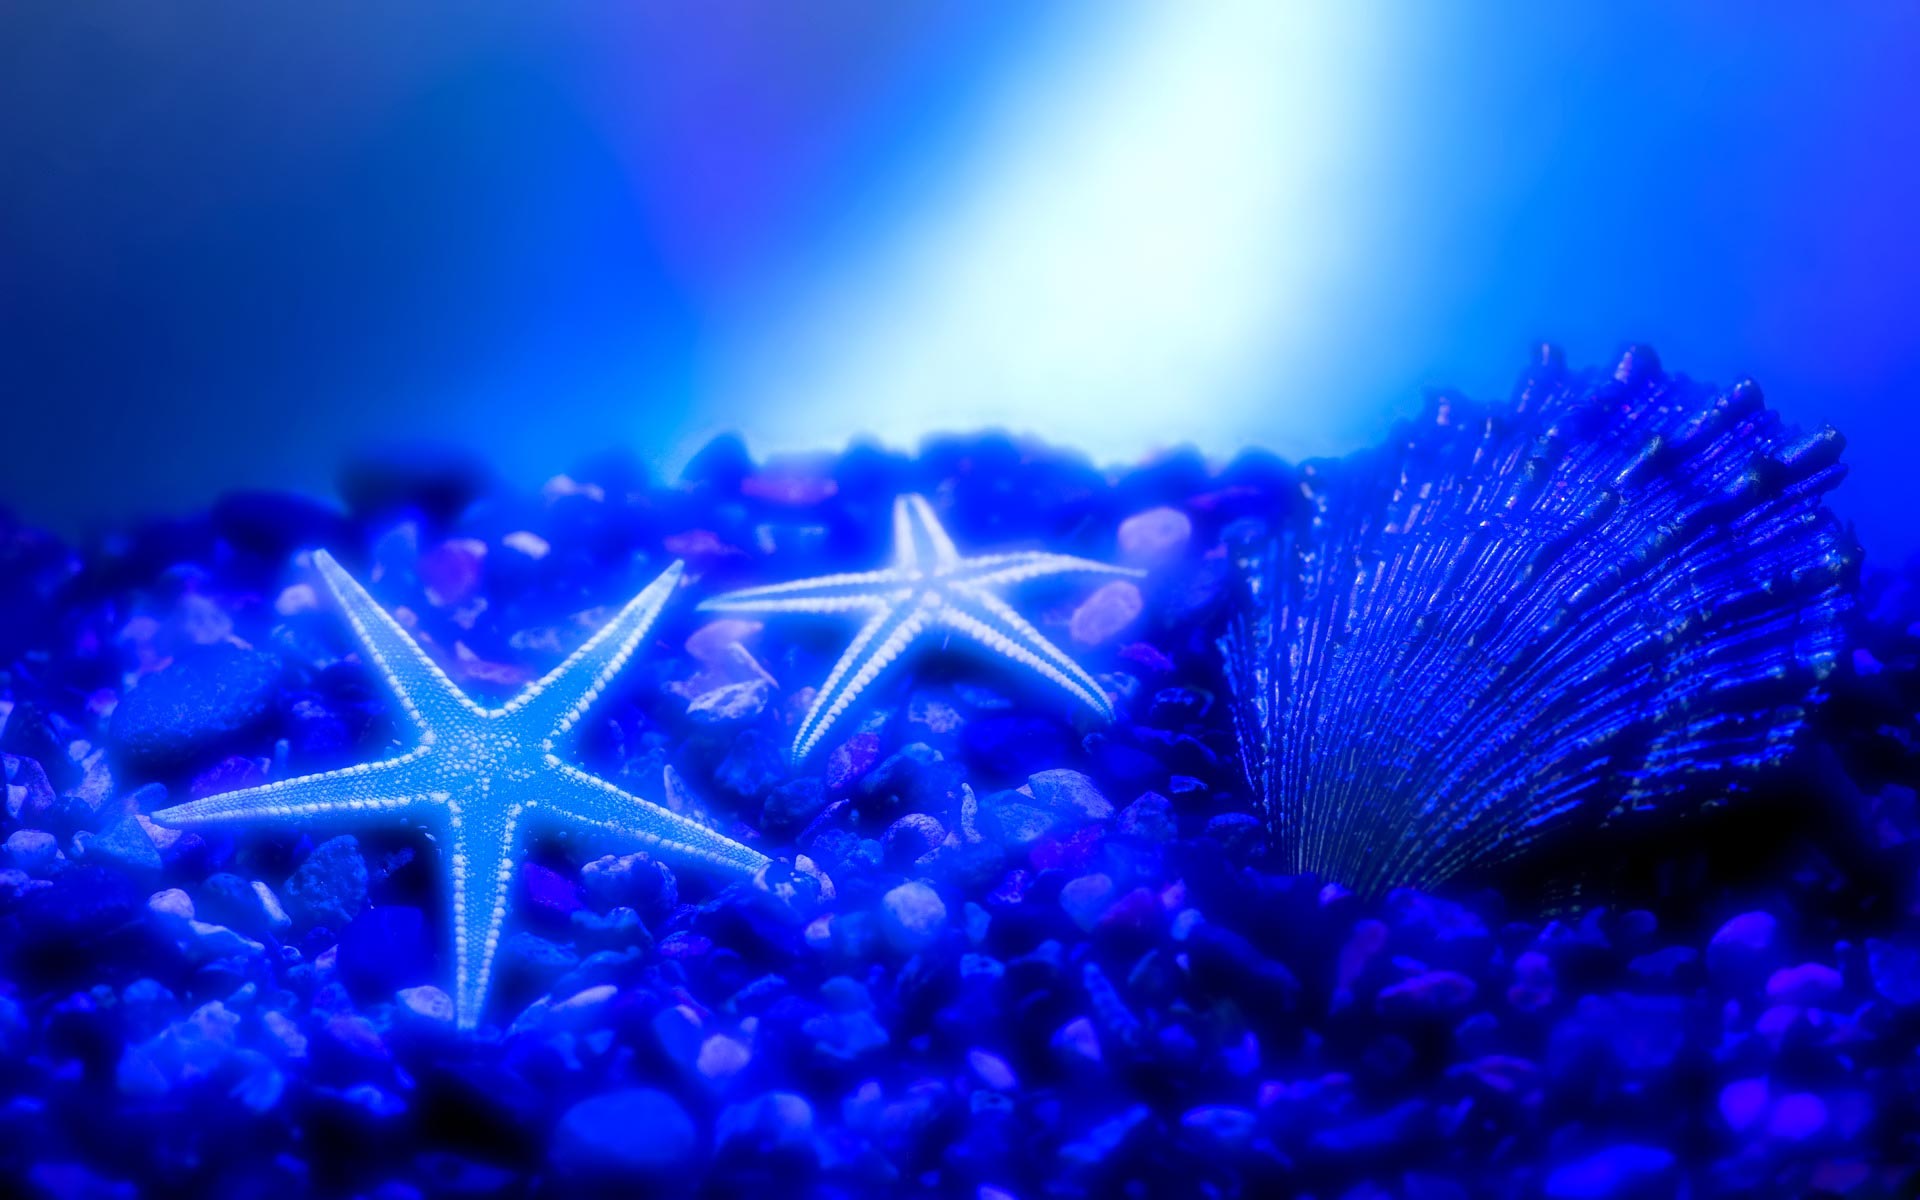 30 Starfish wallpapers HD  Download Free backgrounds